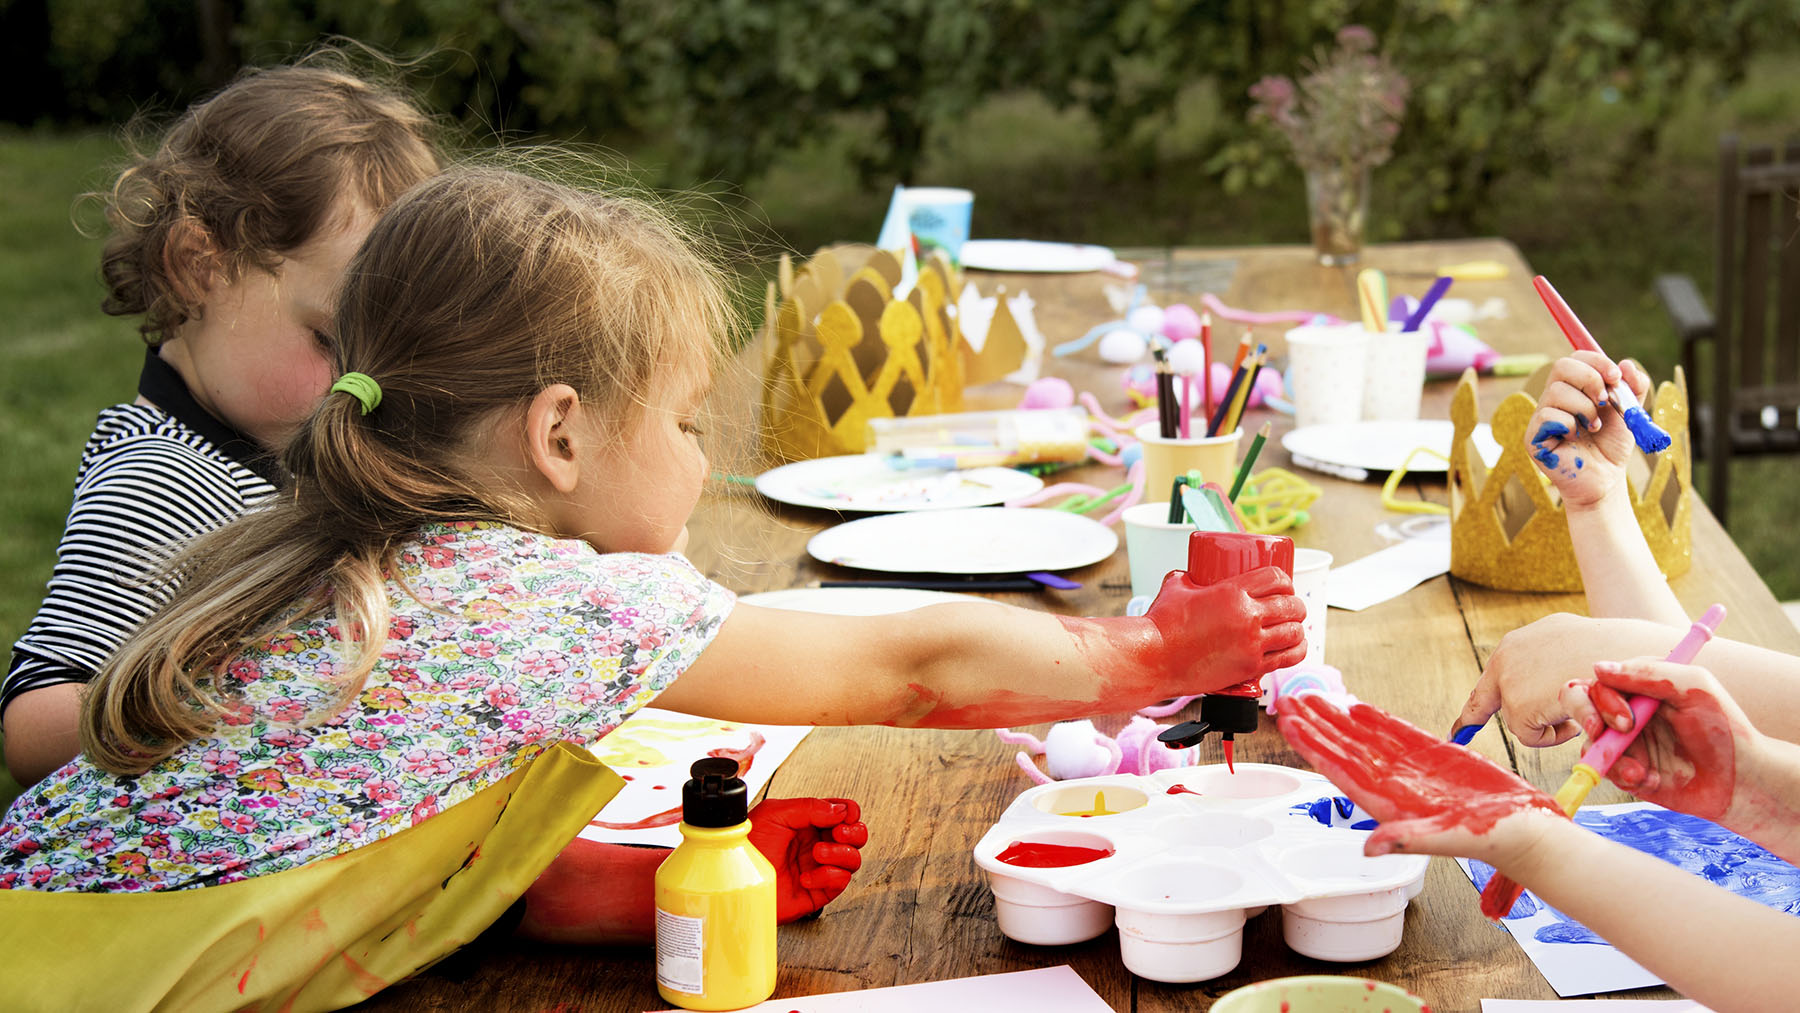 Stock photo of kids doing crafts outdoors by RawPixel